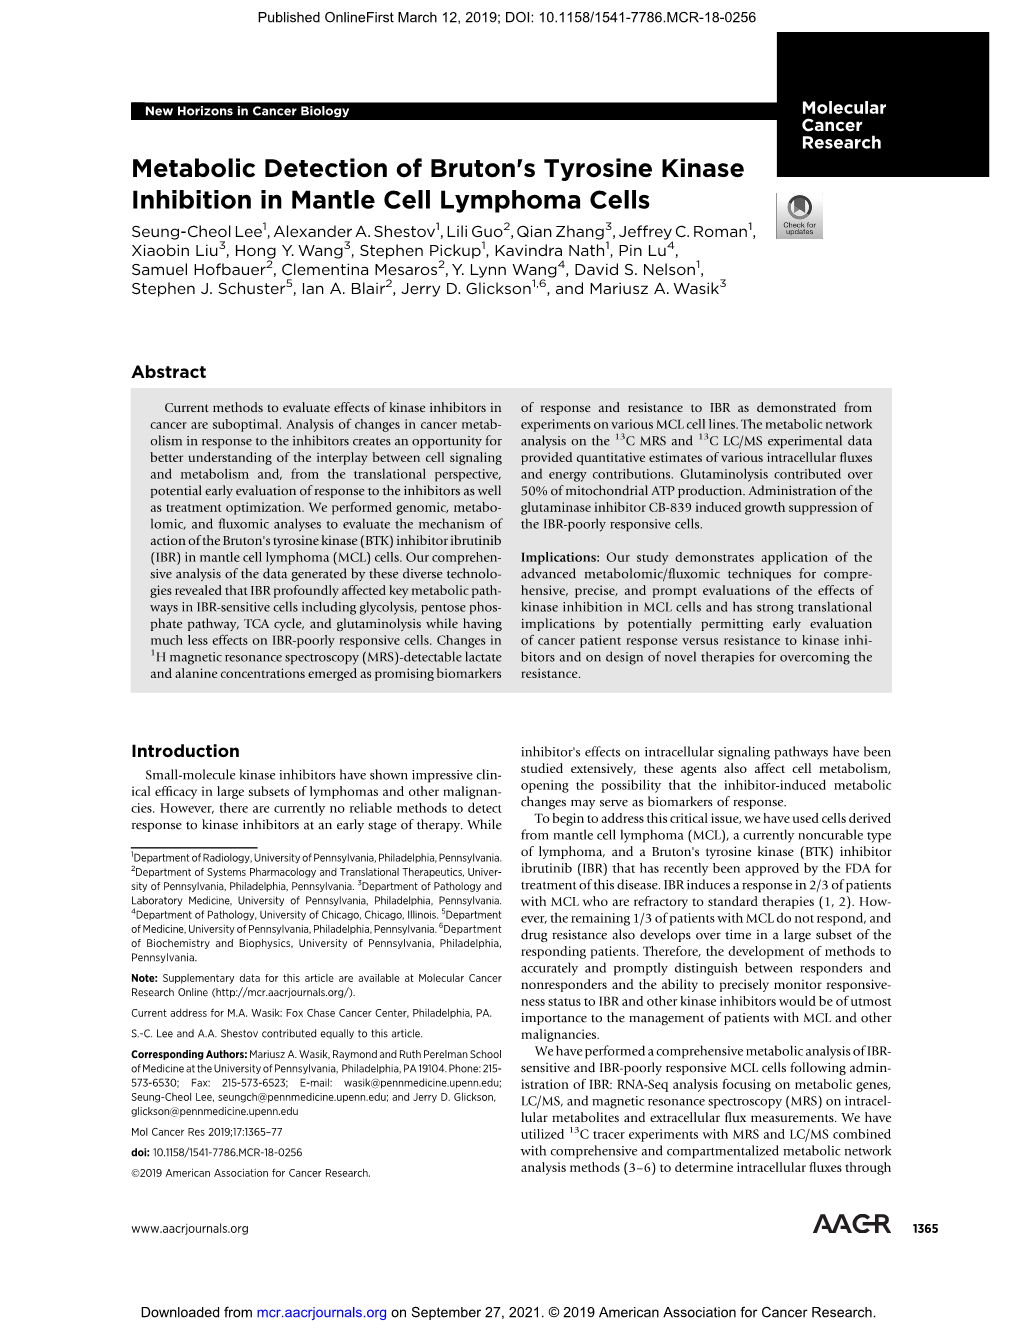 Metabolic Detection of Bruton's Tyrosine Kinase Inhibition in Mantle Cell Lymphoma Cells Seung-Cheol Lee1, Alexander A